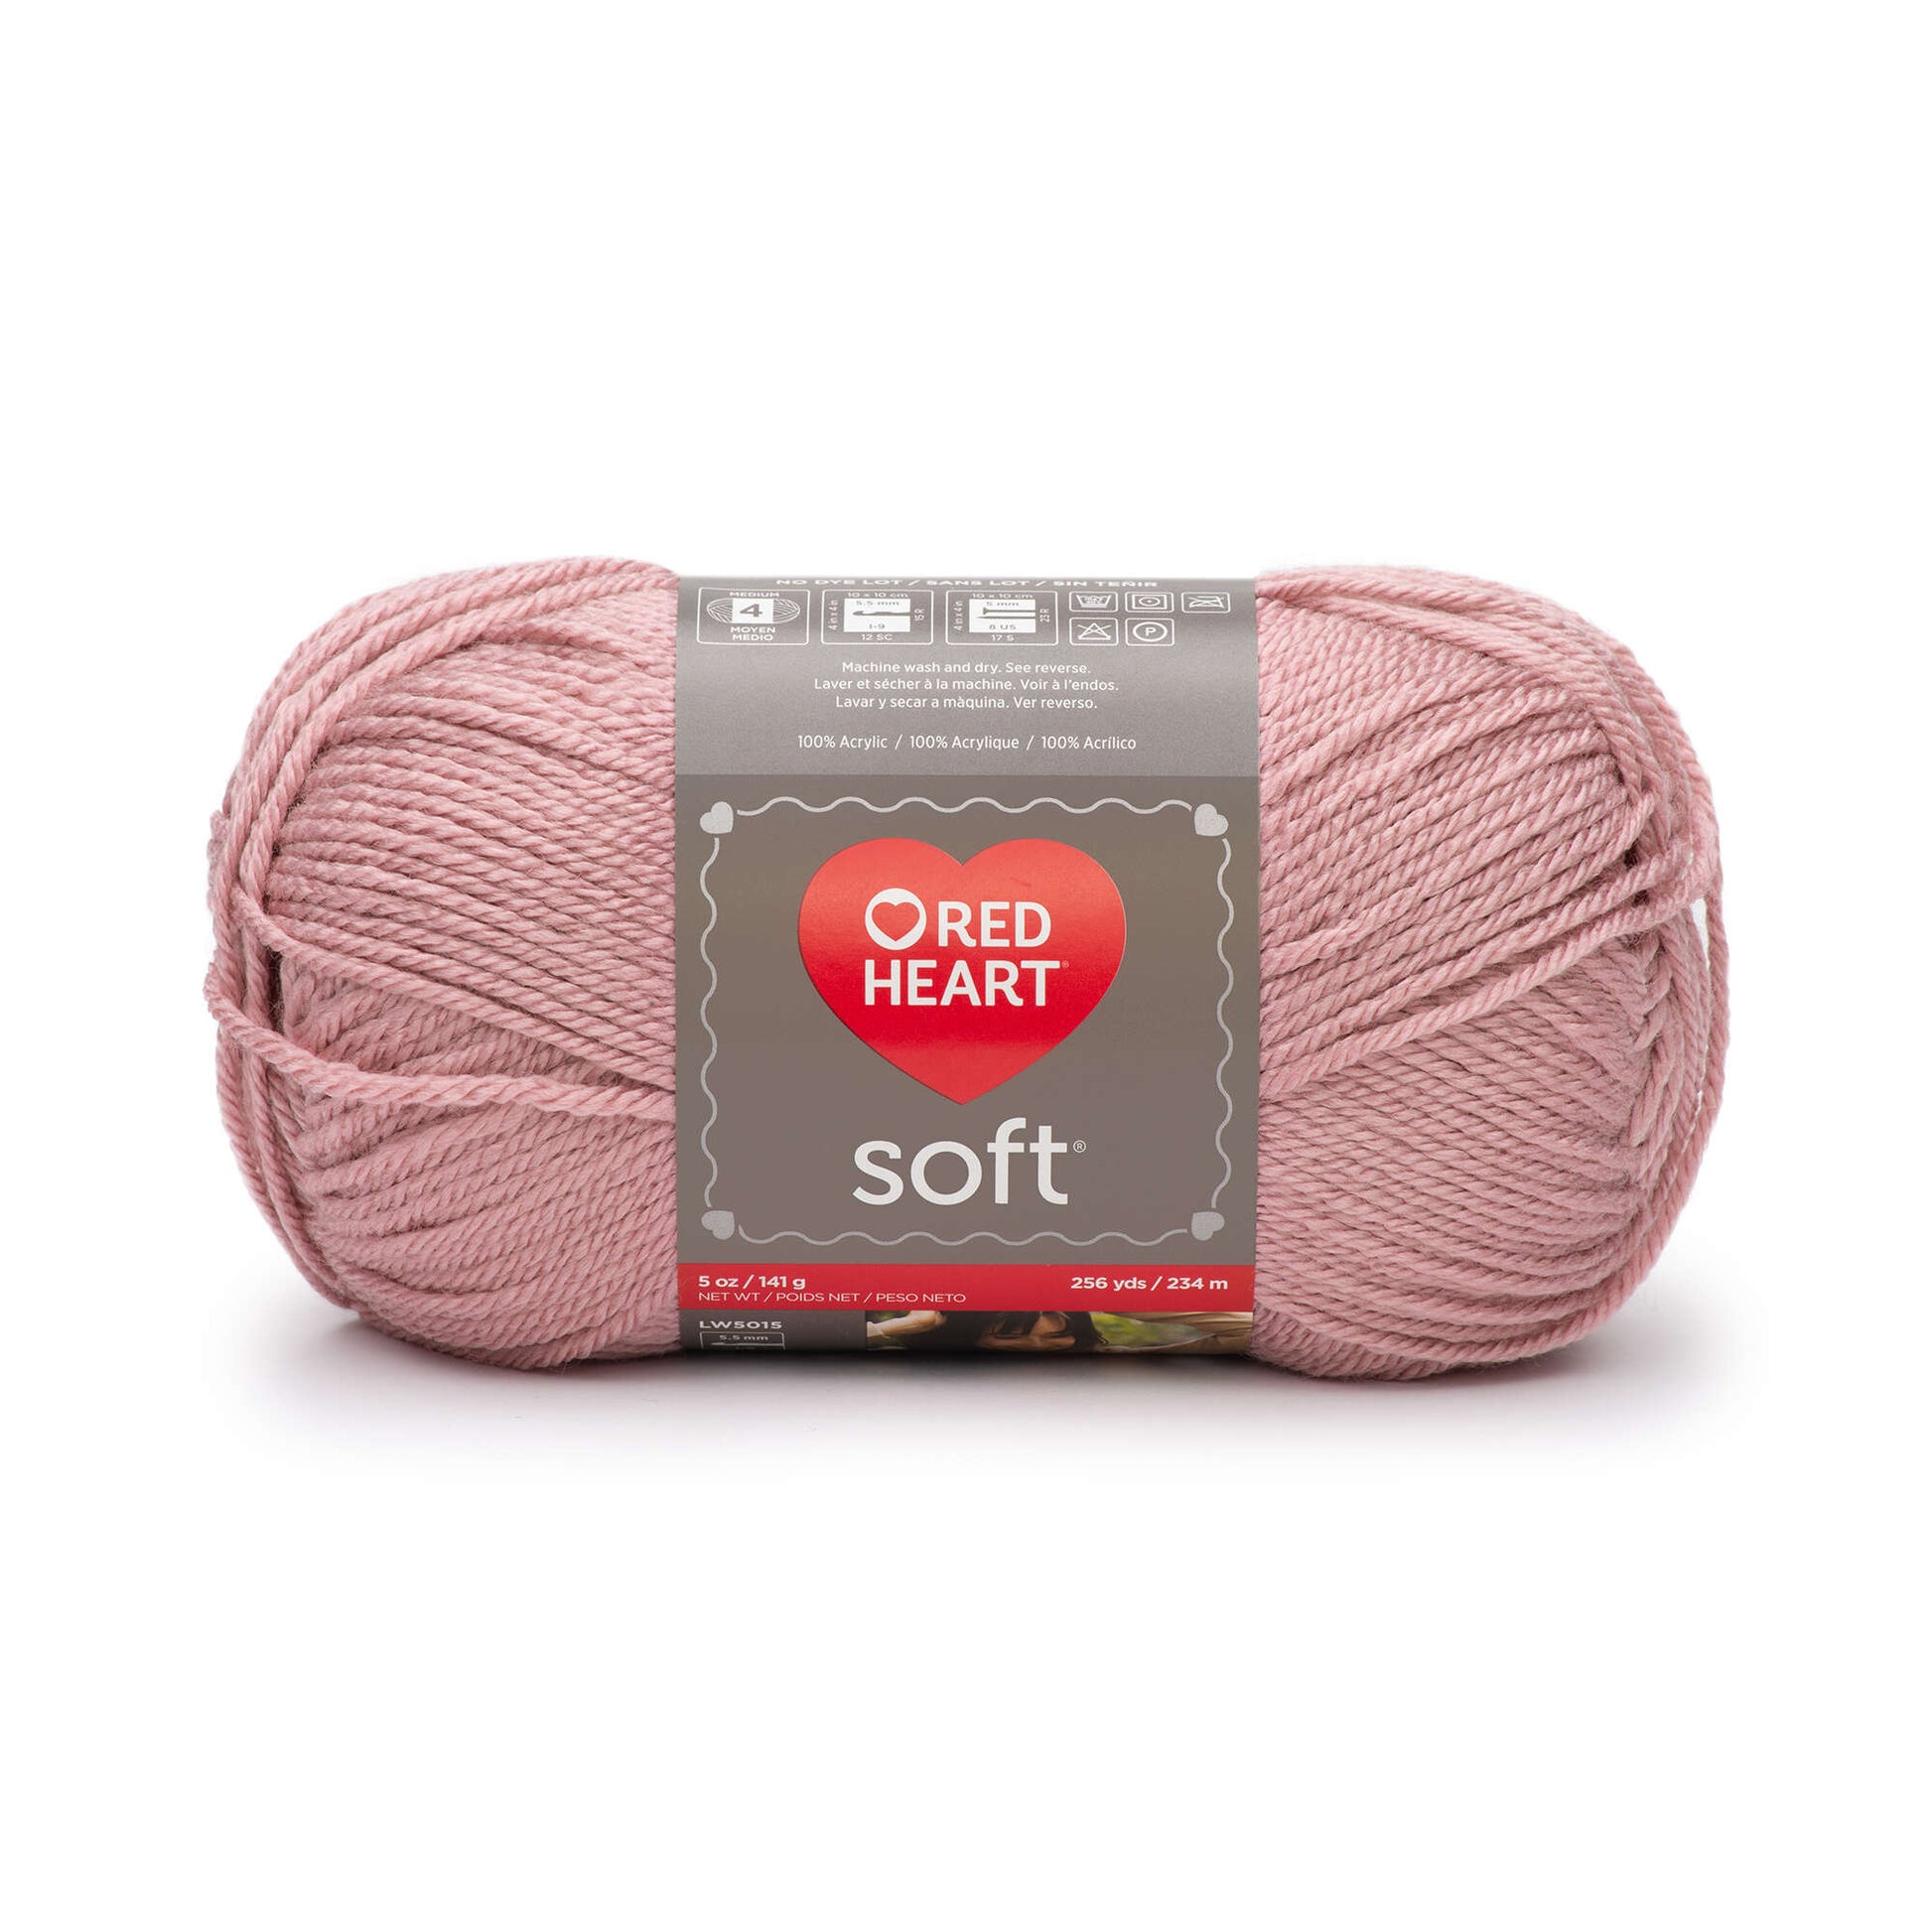 Caron Simply Soft Solids Yarn-Soft Pink, 1 count - Pay Less Super Markets